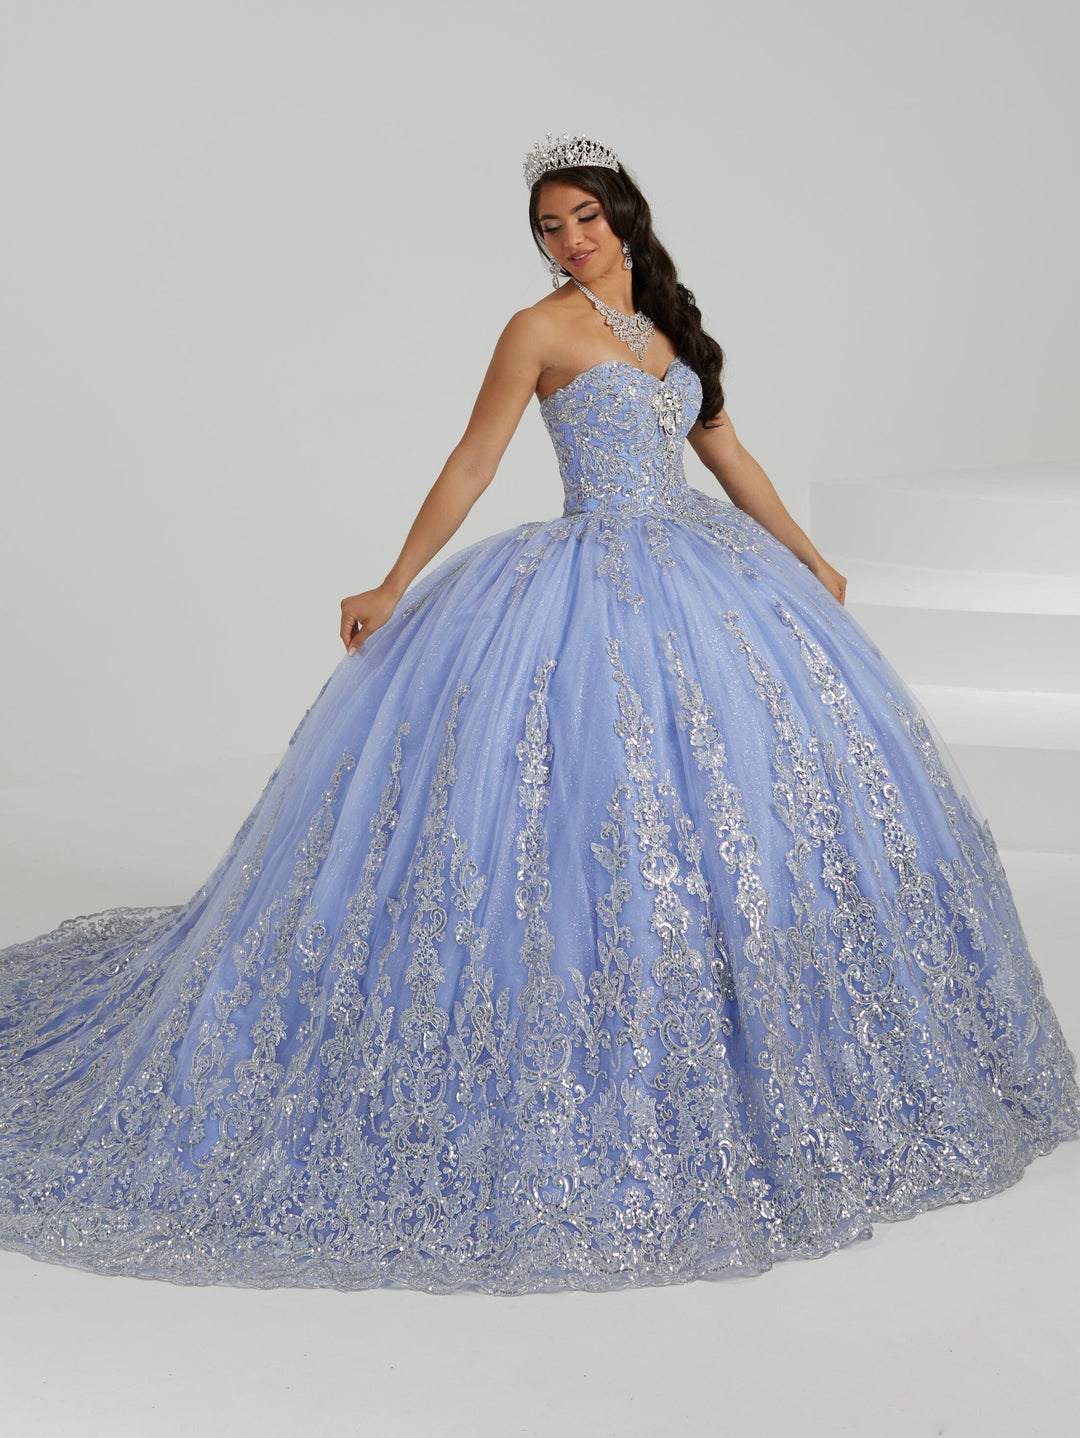 Convertible Strap Quinceanera Dress by Fiesta Gowns 56481